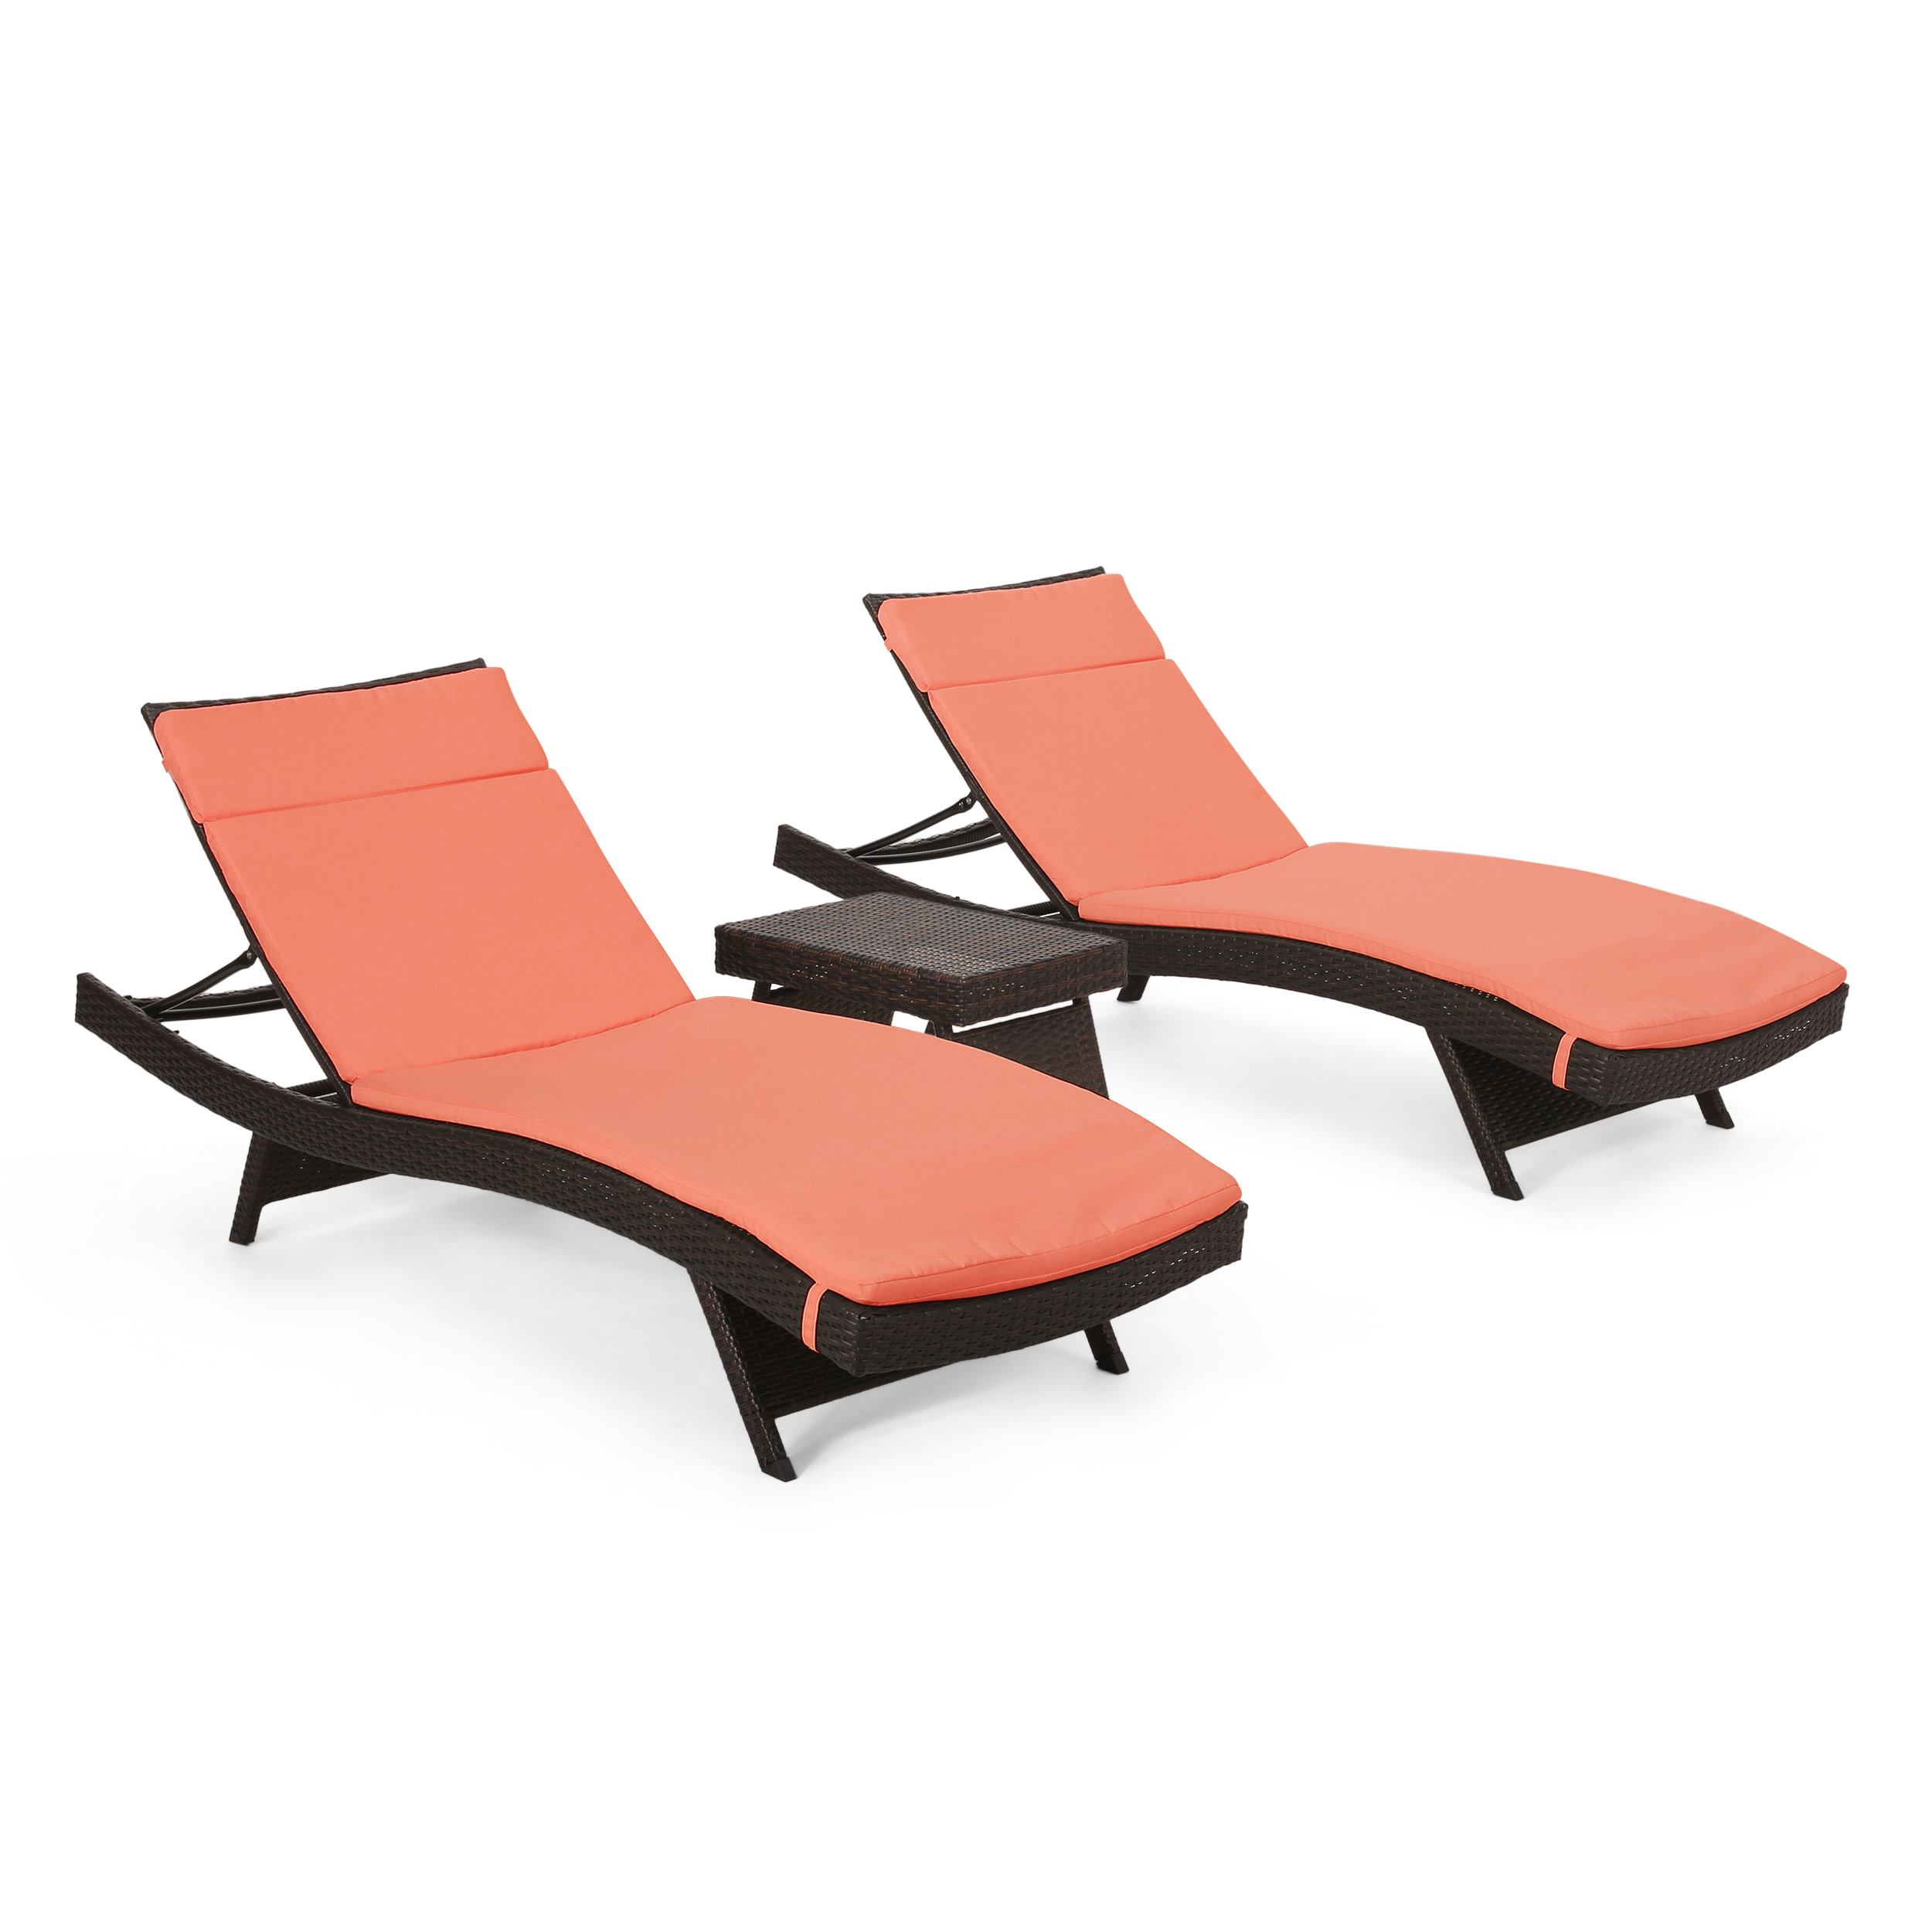 GDF Studio Olivia Outdoor Wicker 3 Piece Armless Adjustable Chaise Lounge Chat Set with Cushions, Multibrown and Orange - image 1 of 13